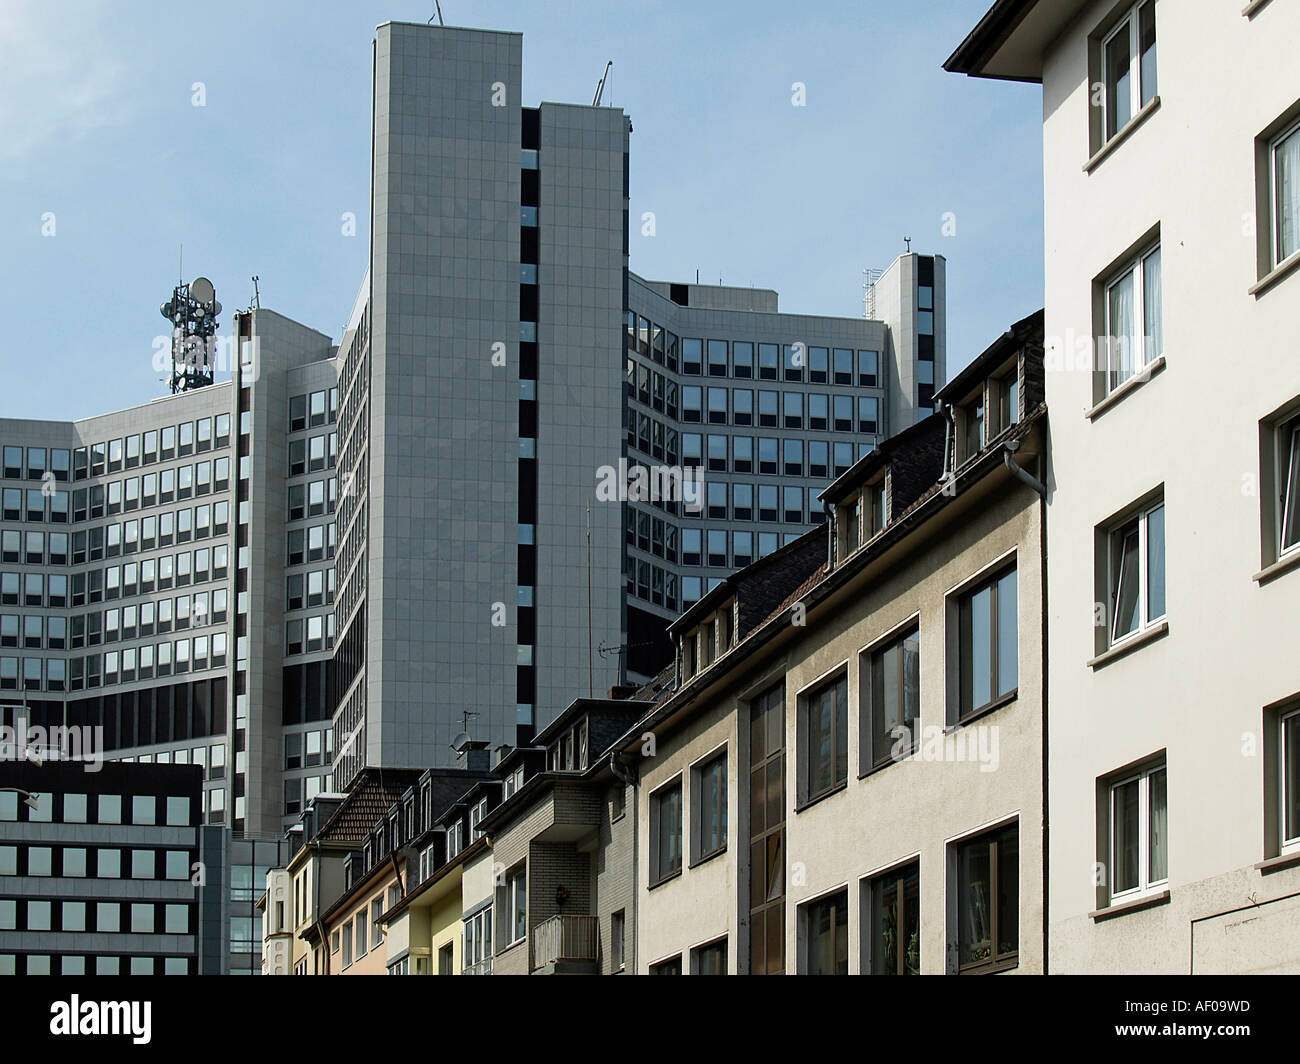 storefronts of flats from the fifties from the time after second wolrd war and facades of modern houses in the city of Essen Stock Photo